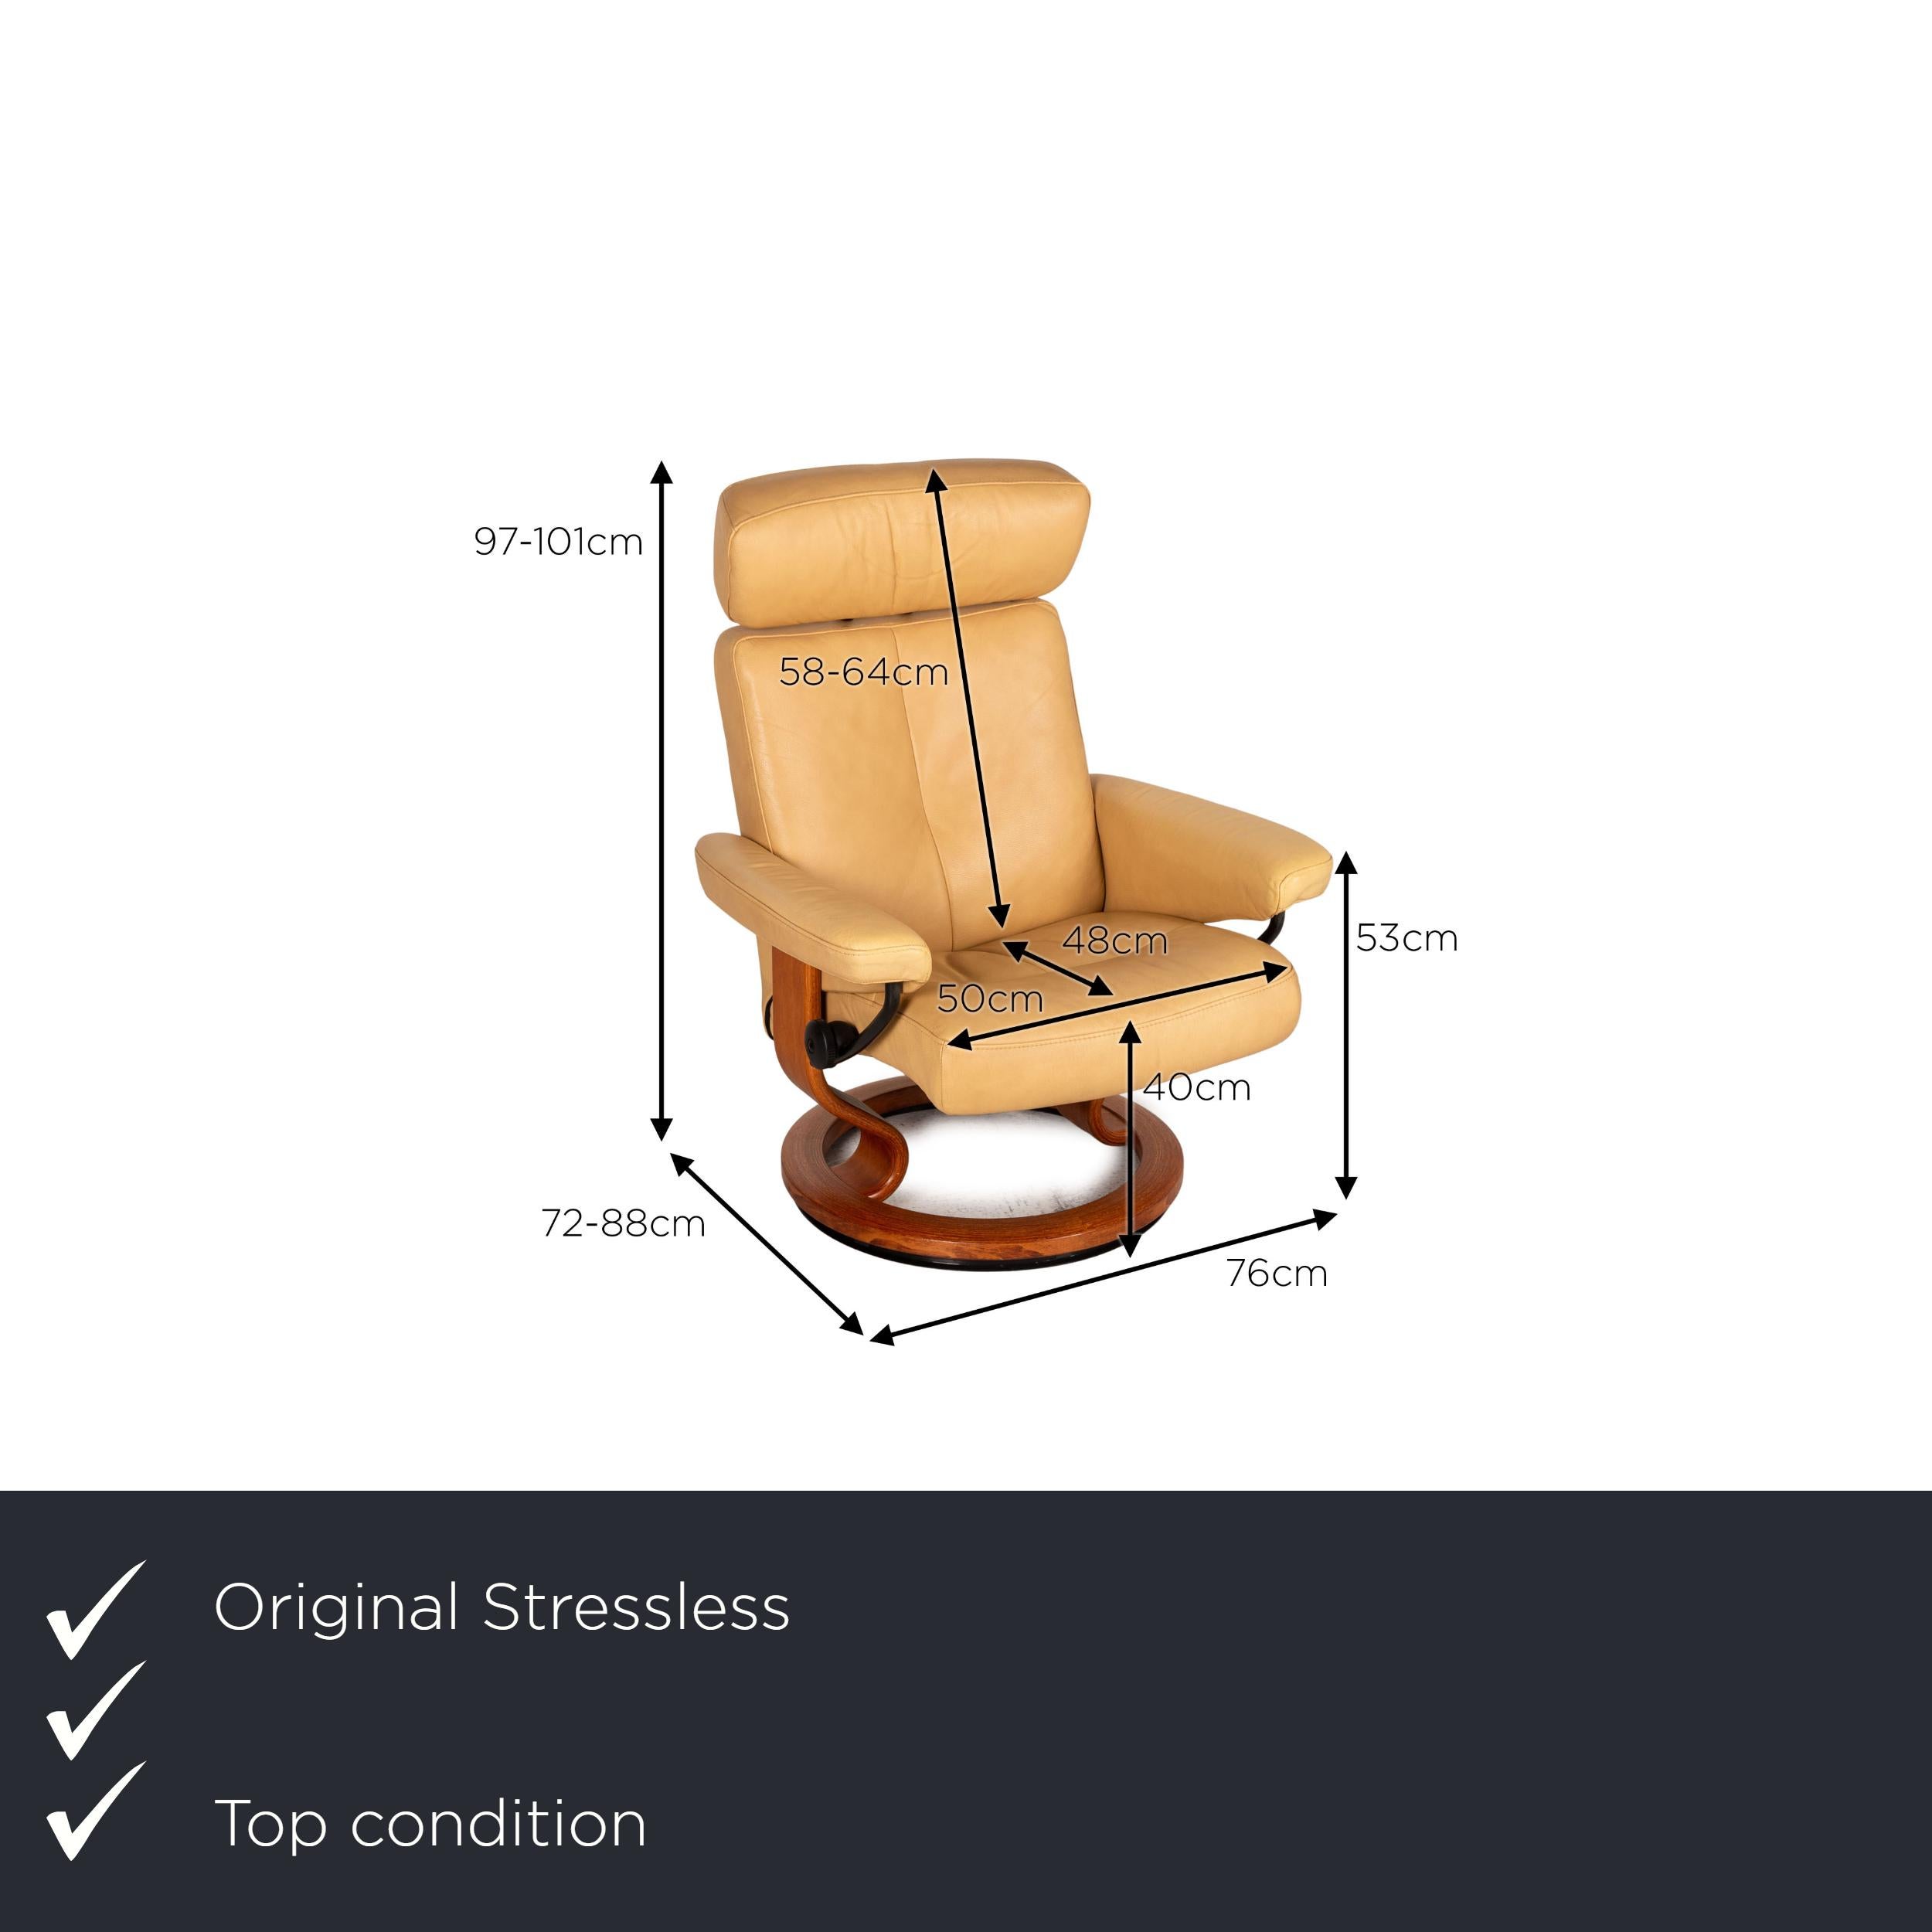 We present to you a Stressless Orion leather armchair beige incl. Stool function relaxation function.
 

 Product measurements in centimeters:
 

Depth: 72
Width: 76
Height: 97
Seat height: 40
Rest height: 53
Seat depth: 48
Seat width: